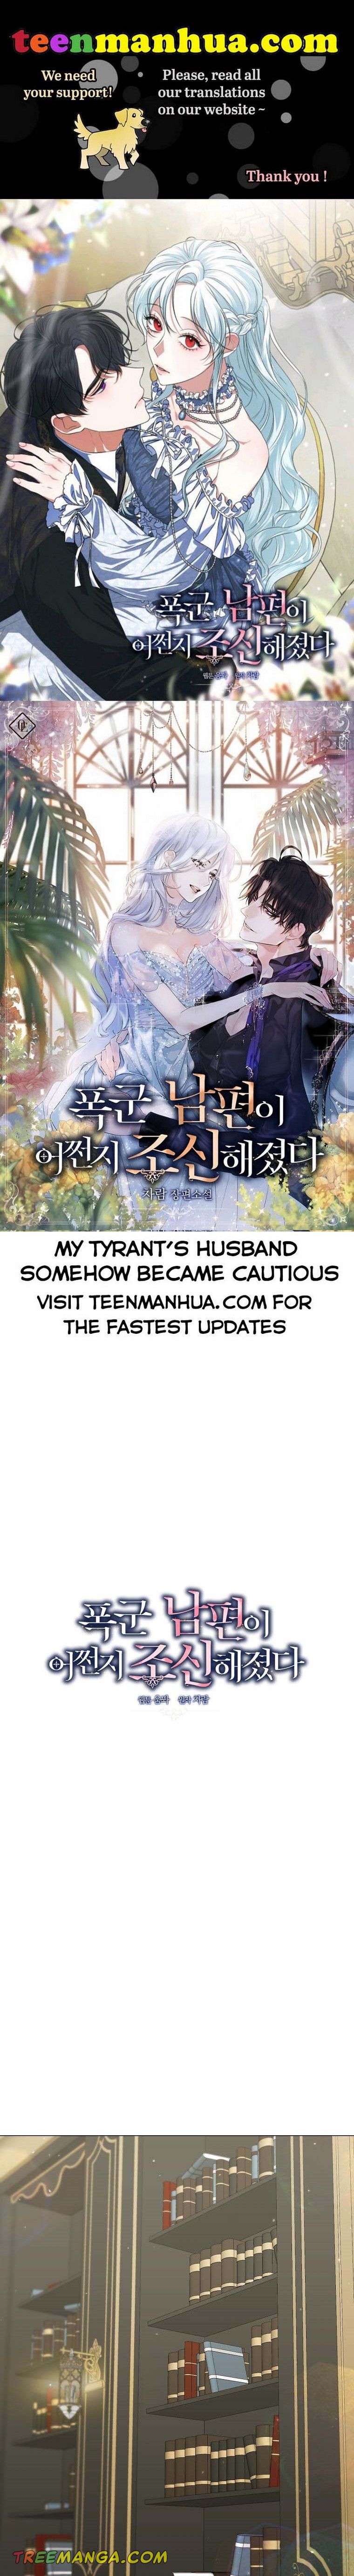 Somehow, My Tyrant Husband Has Became Cautious - Page 1